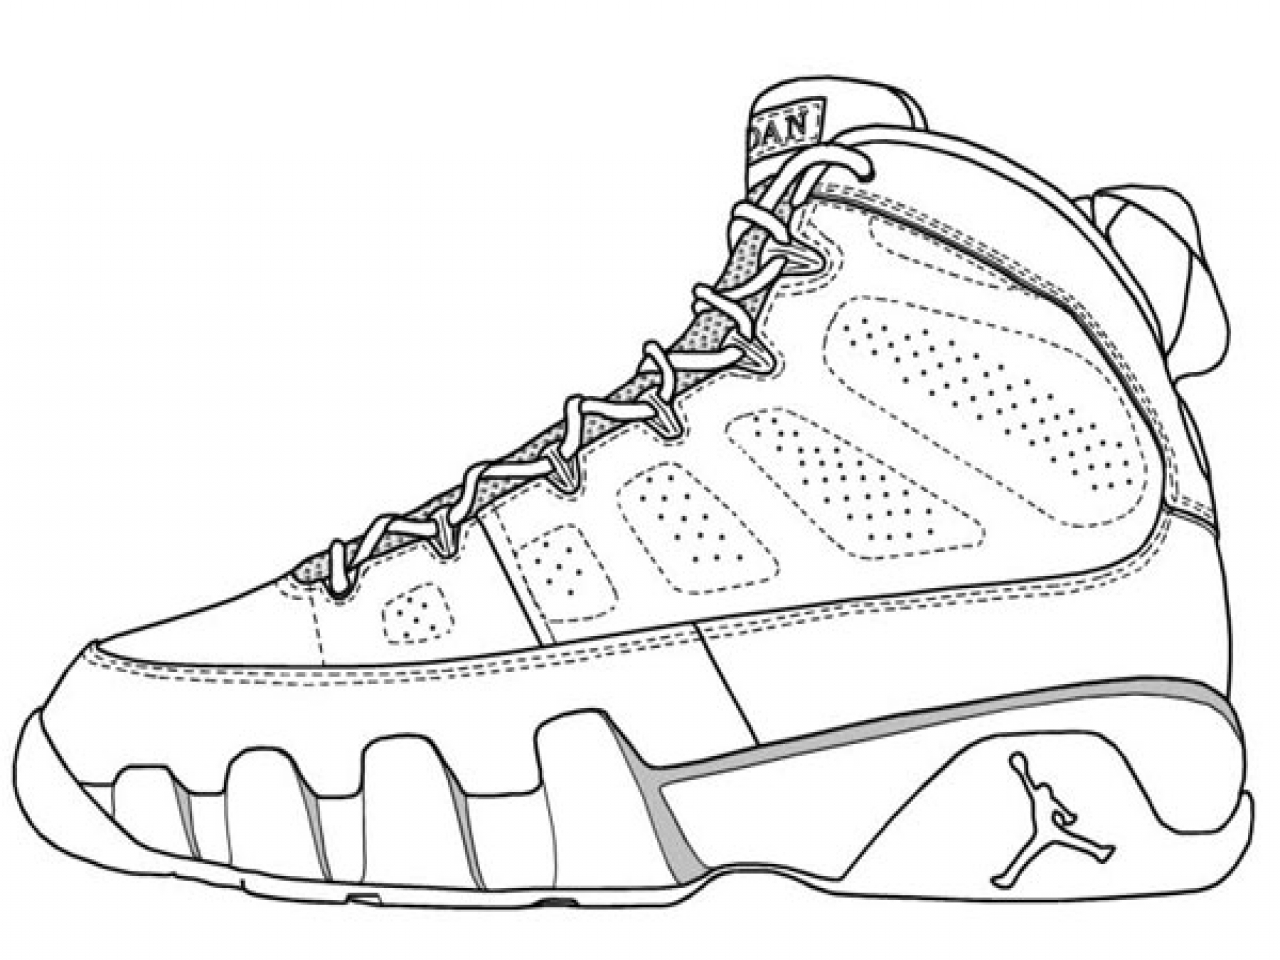 Cool stephen curry coloring pages pdf